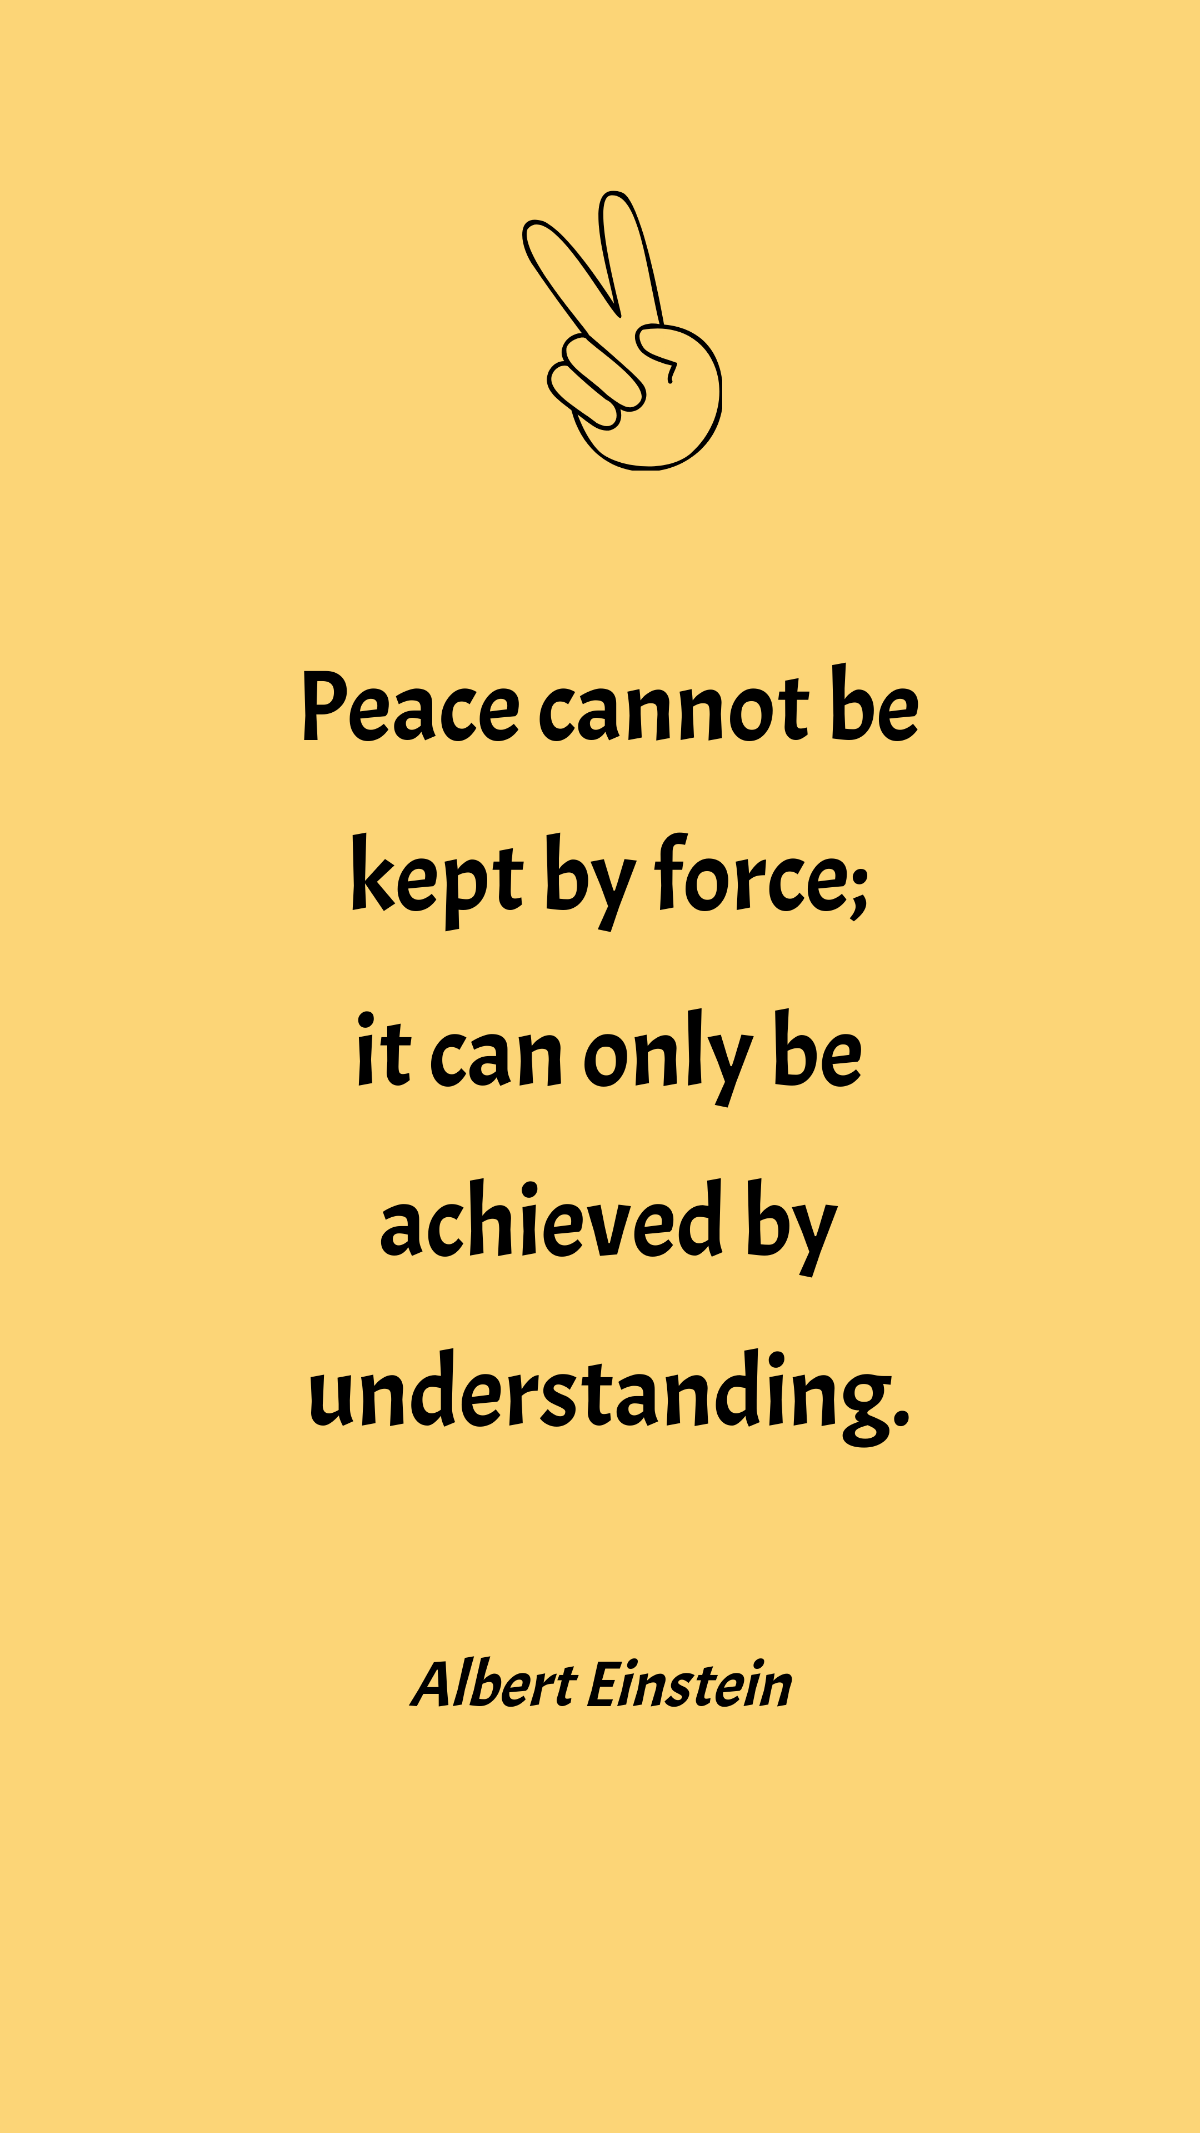 Free Albert Einstein - Peace cannot be kept by force; it can only be achieved by understanding. Template